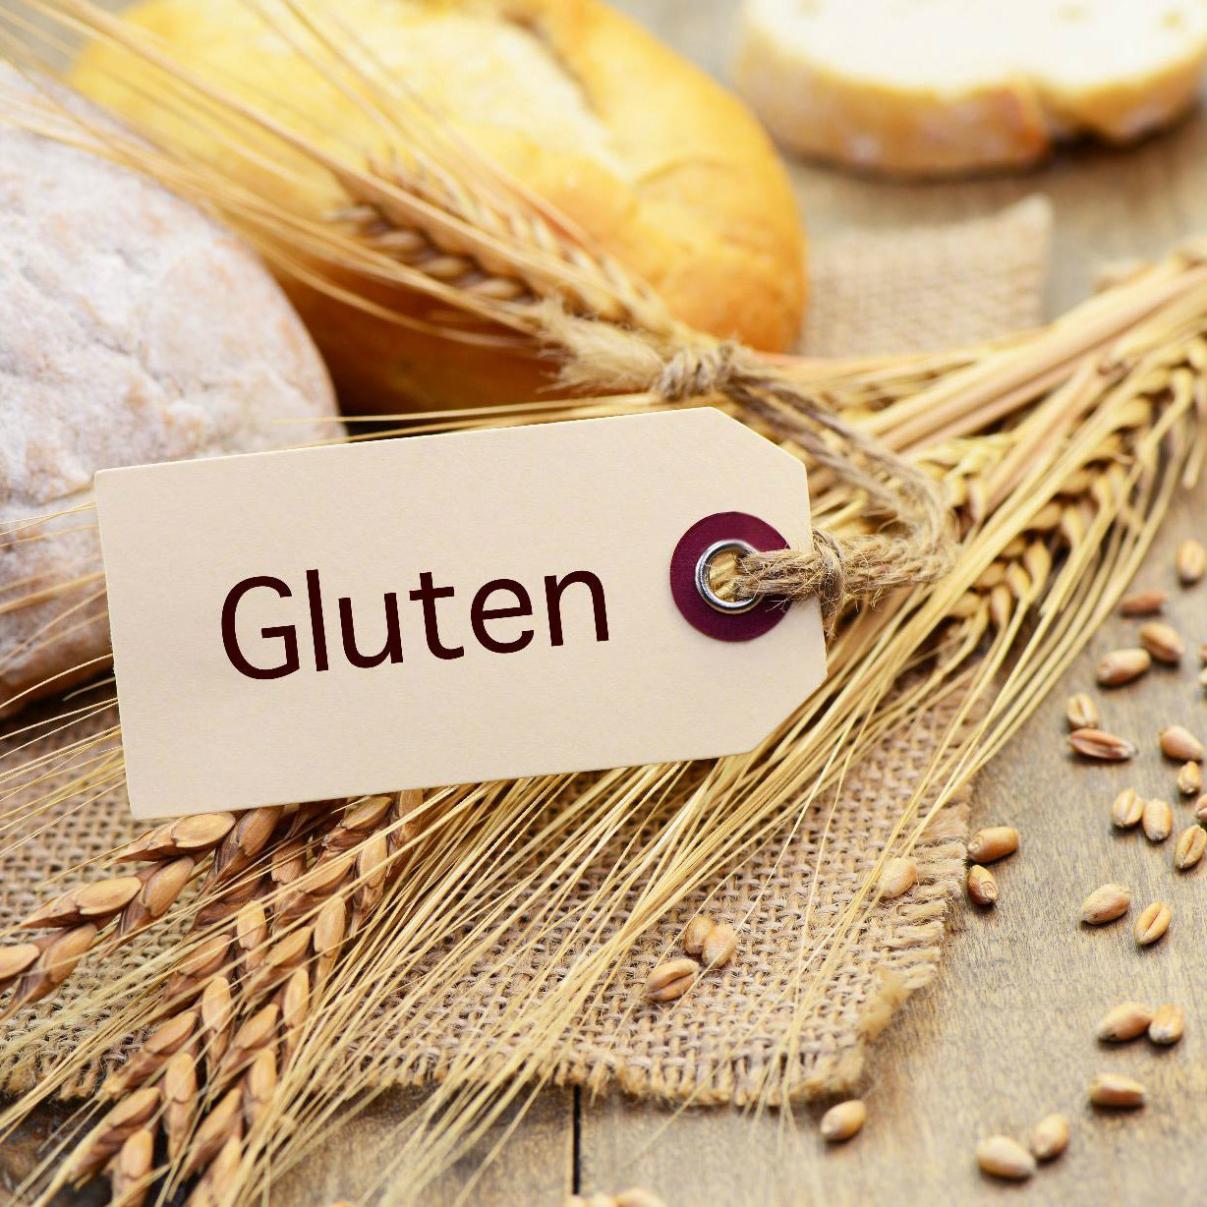 Gluten-Free Snacks: How Can I Satisfy My Cravings Without Gluten?